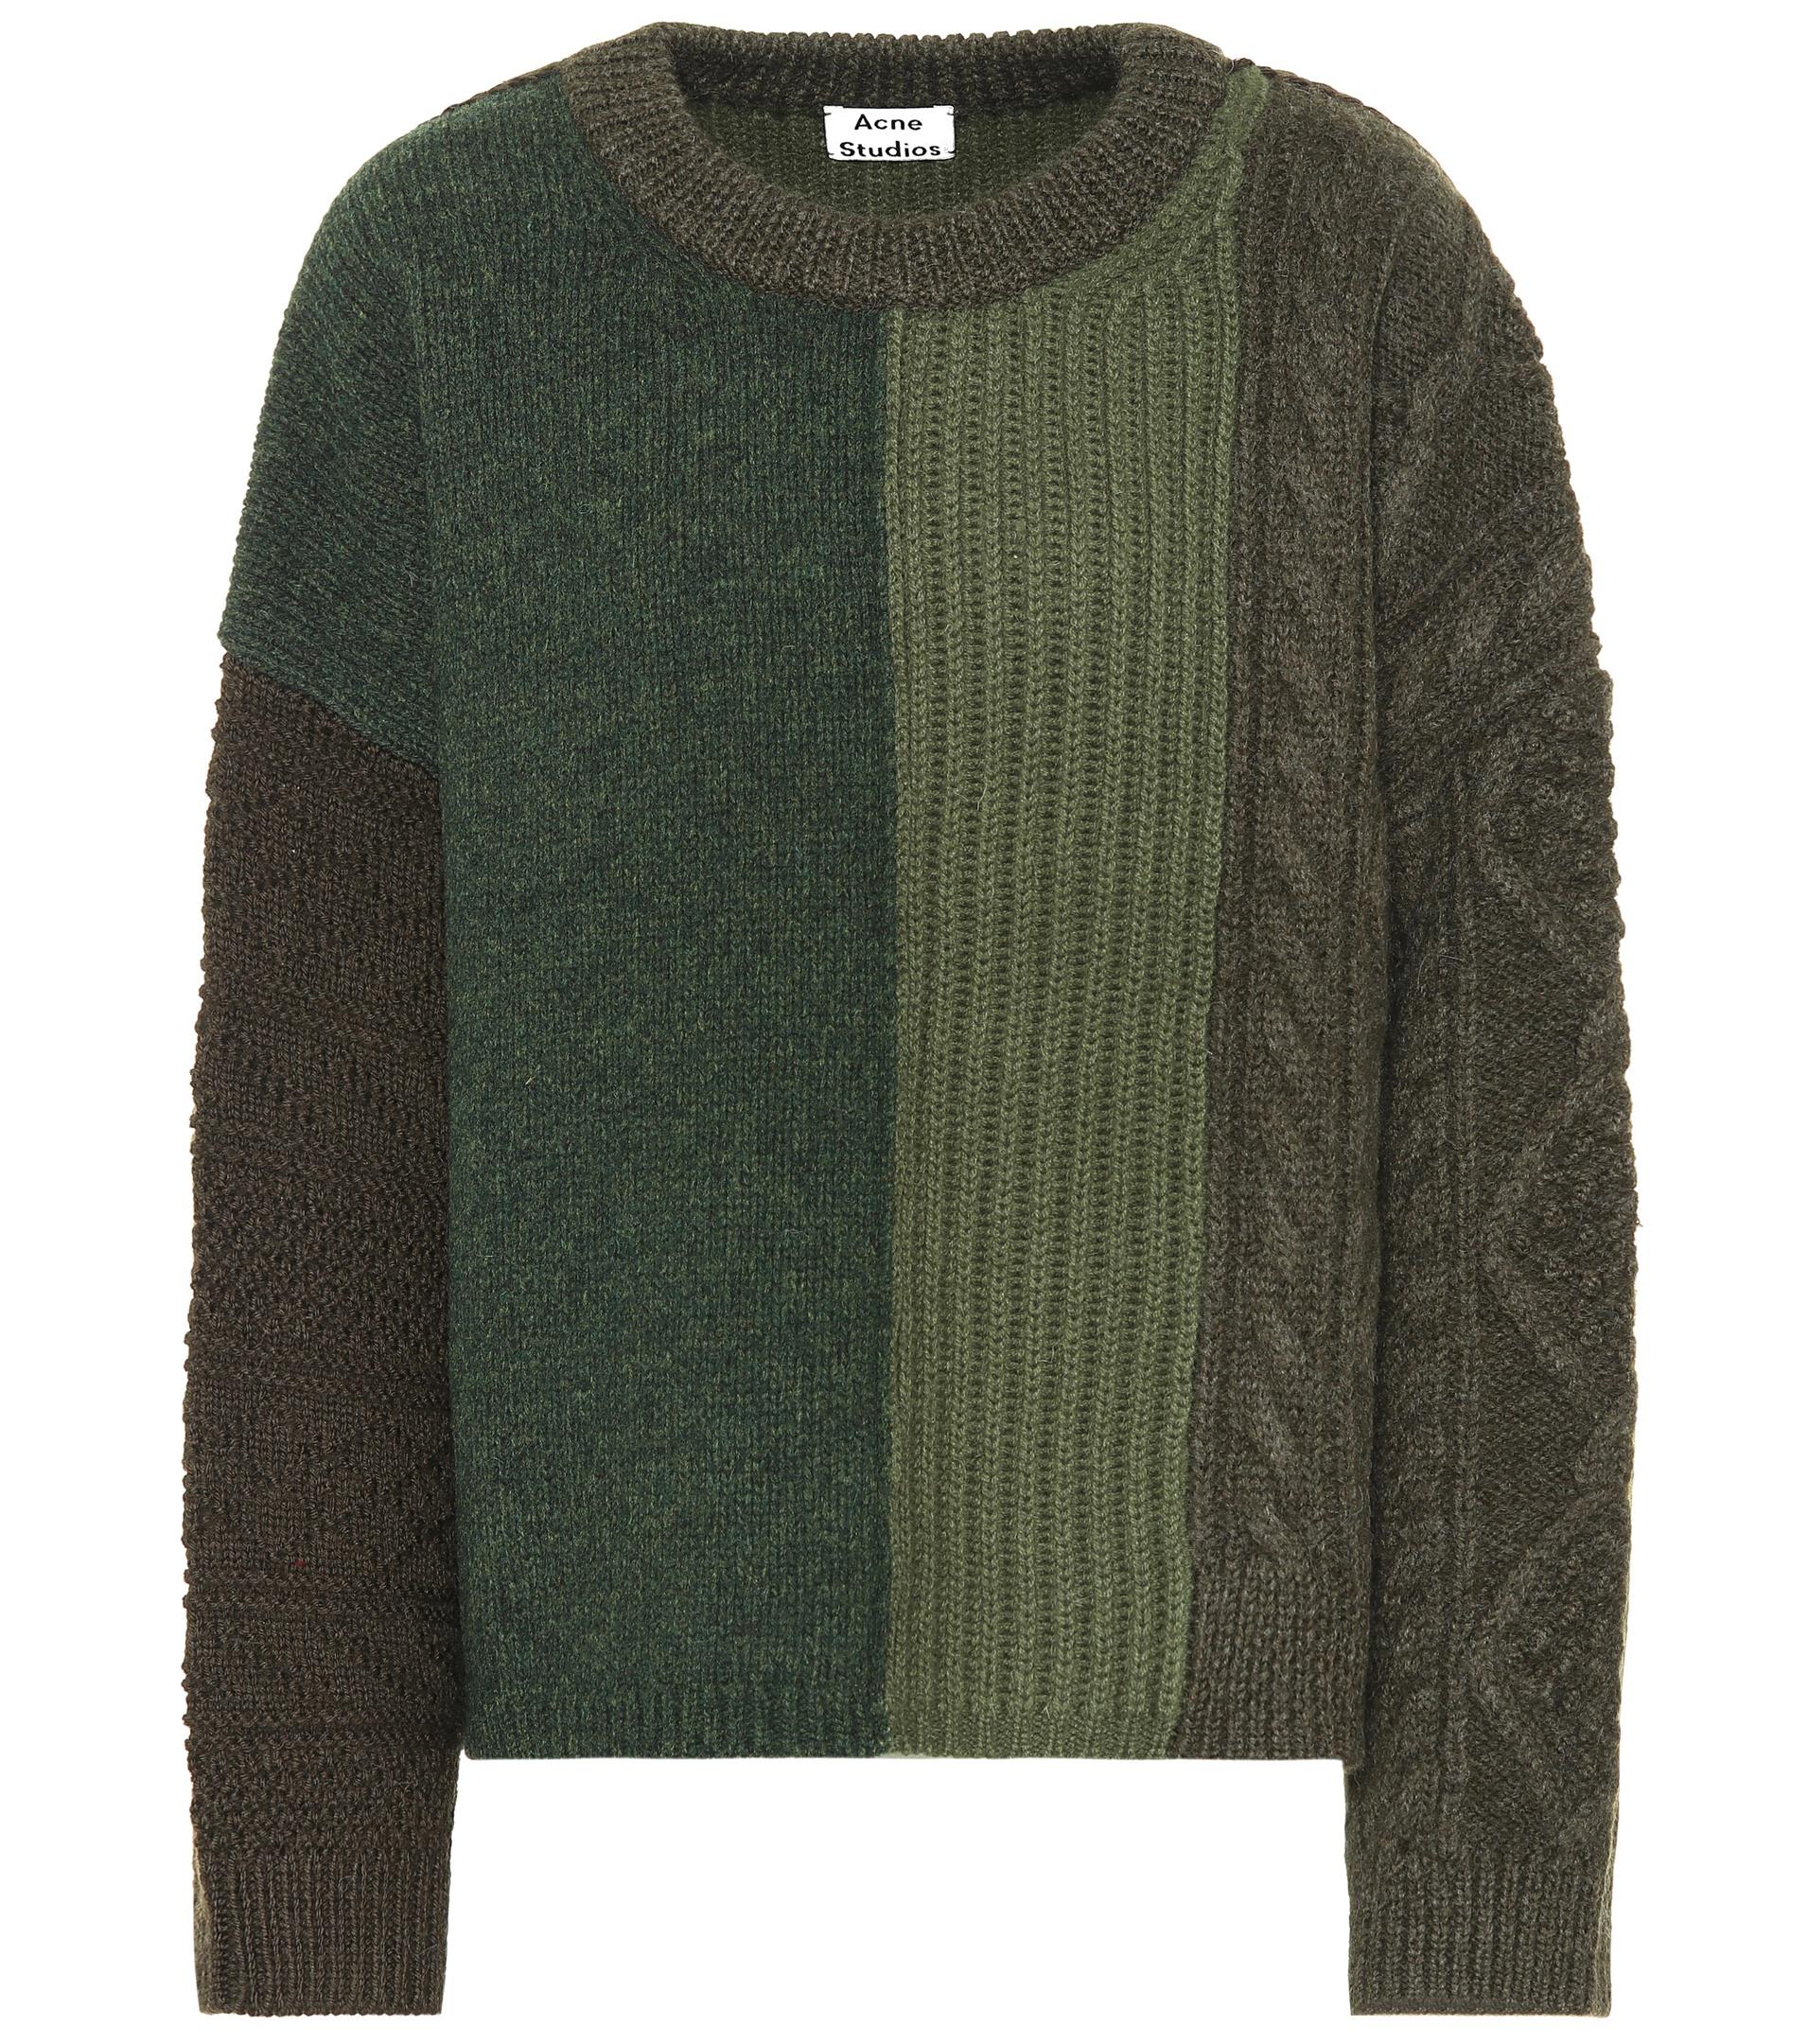 Acne Studios Patchwork Wool Sweater in Green - Lyst